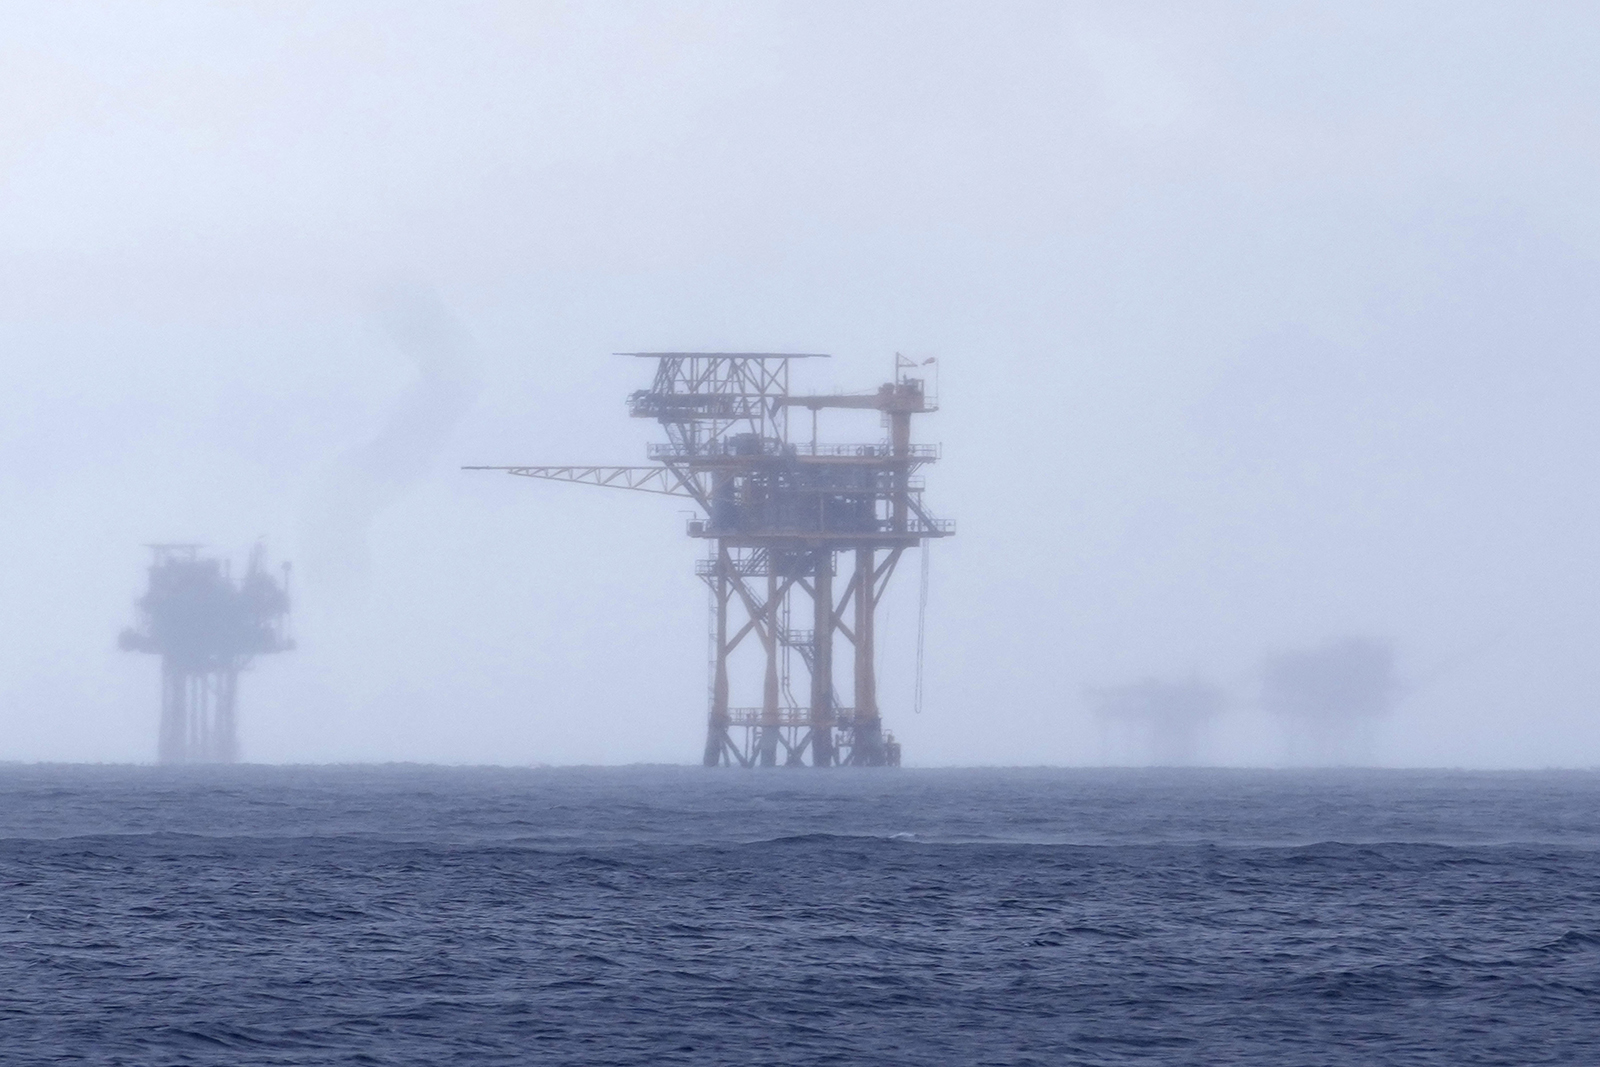 An oil drilling platform on water